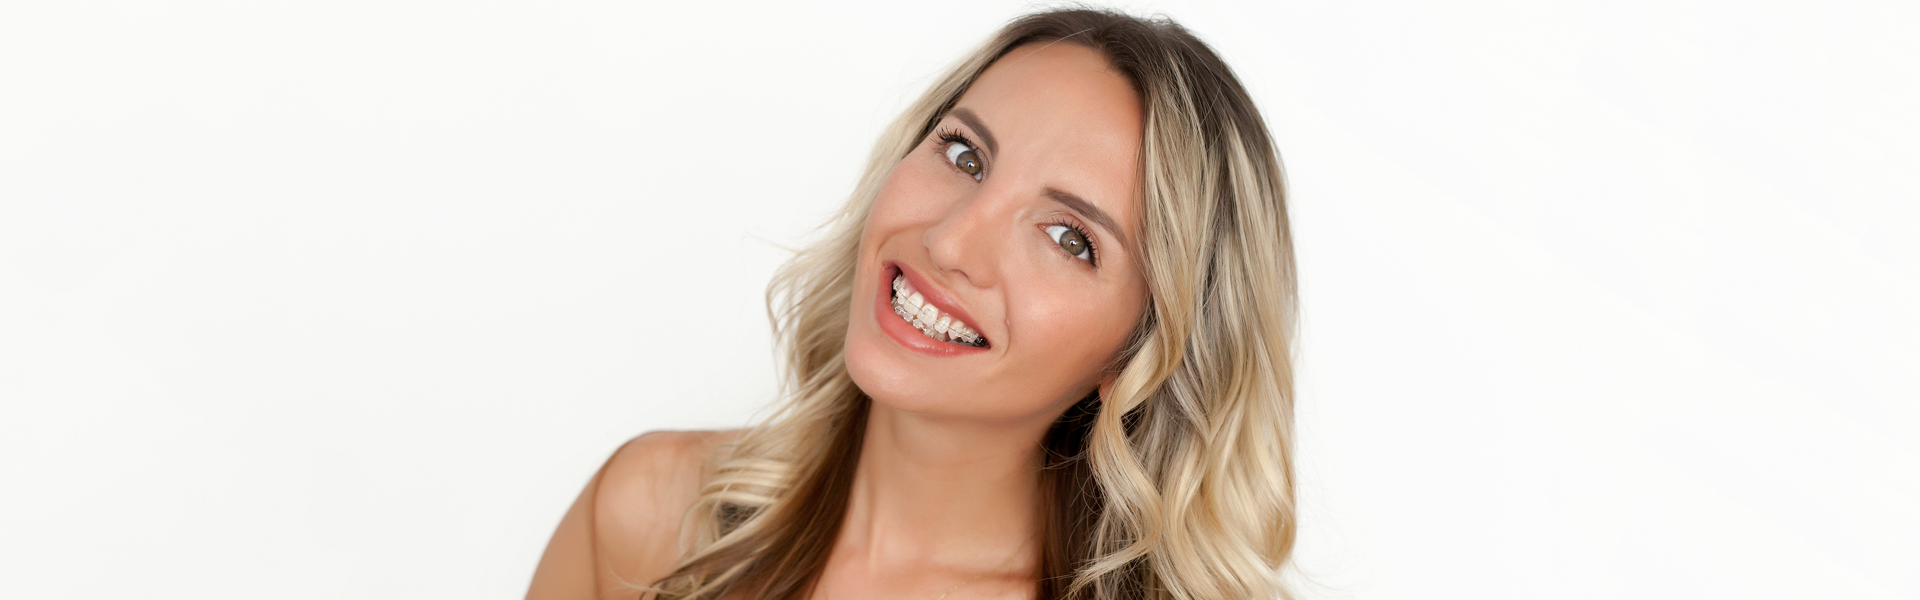 Clear Braces or Invisalign: Which Are Right For You?